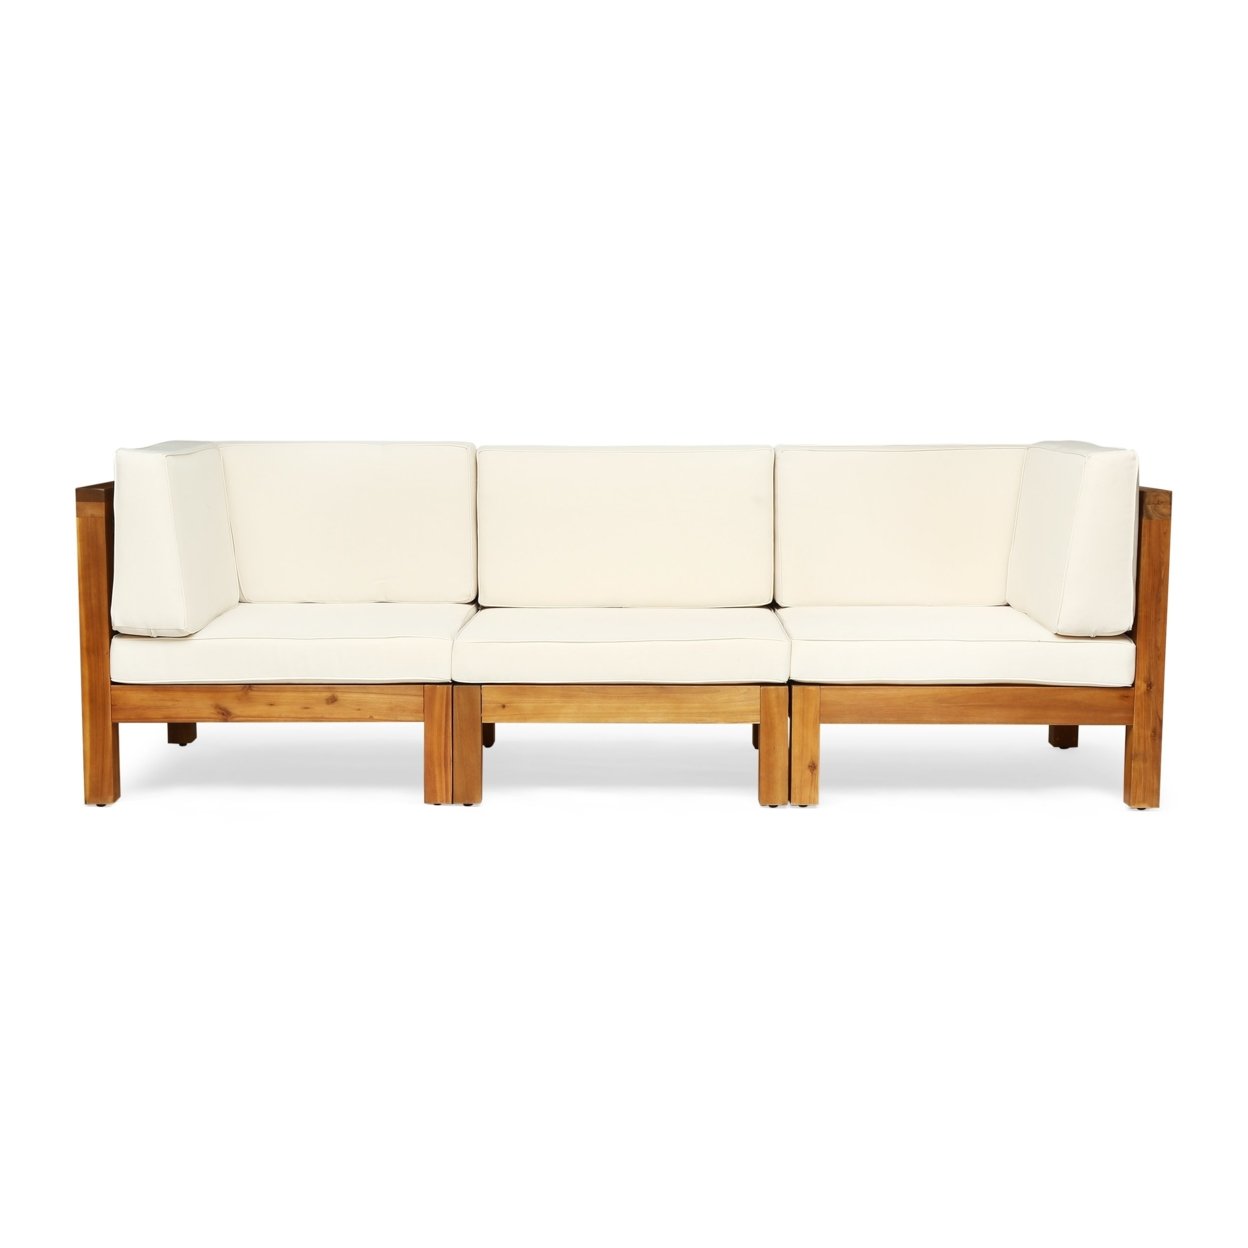 Dawson Outdoor Sectional Sofa Set - 3-Seater - Acacia Wood - Outdoor Cushions - Red, Teak